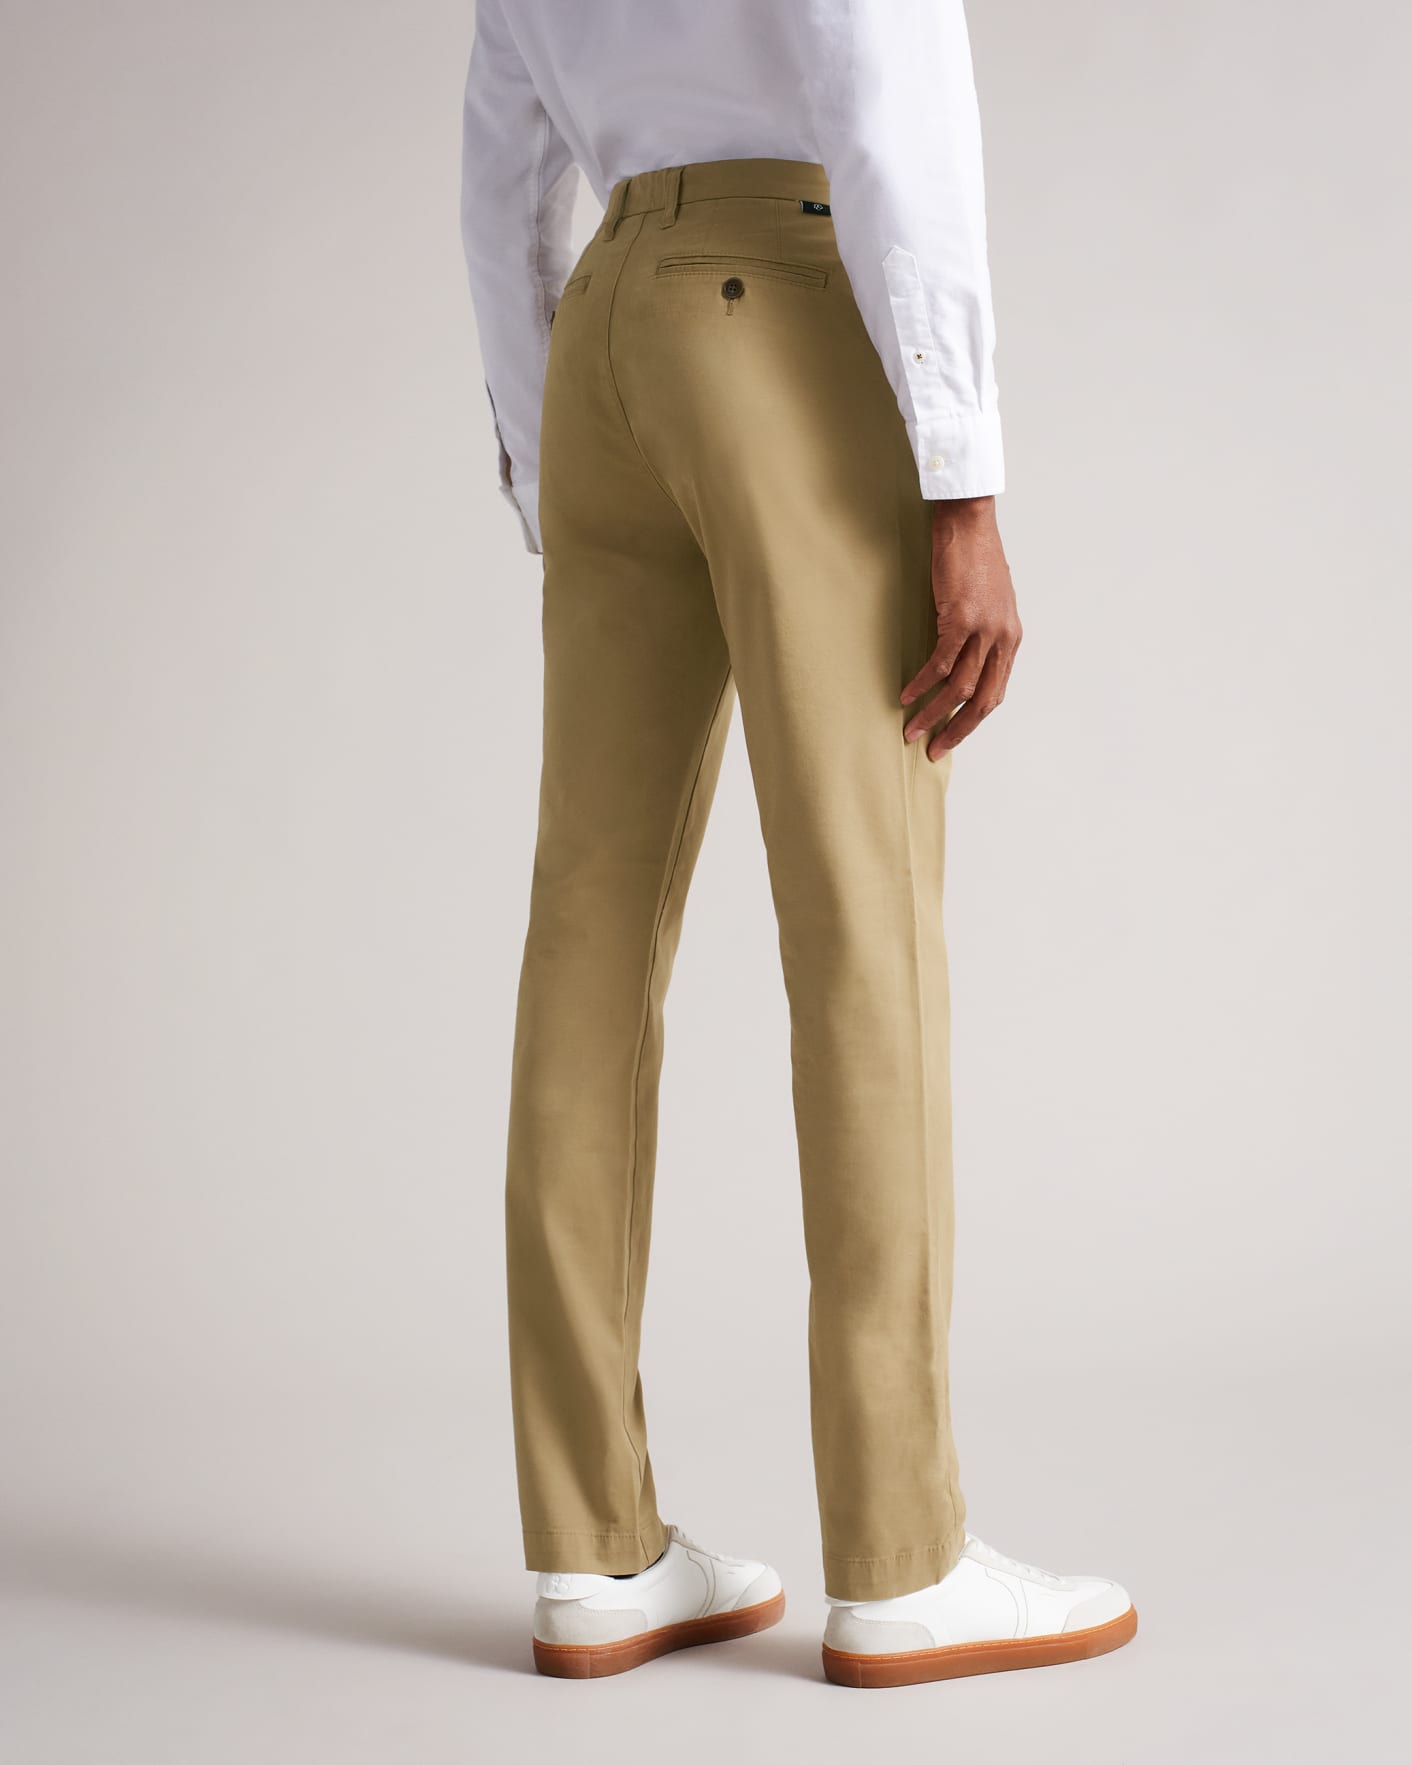 Tostado Chino Slim Fit Ted Baker